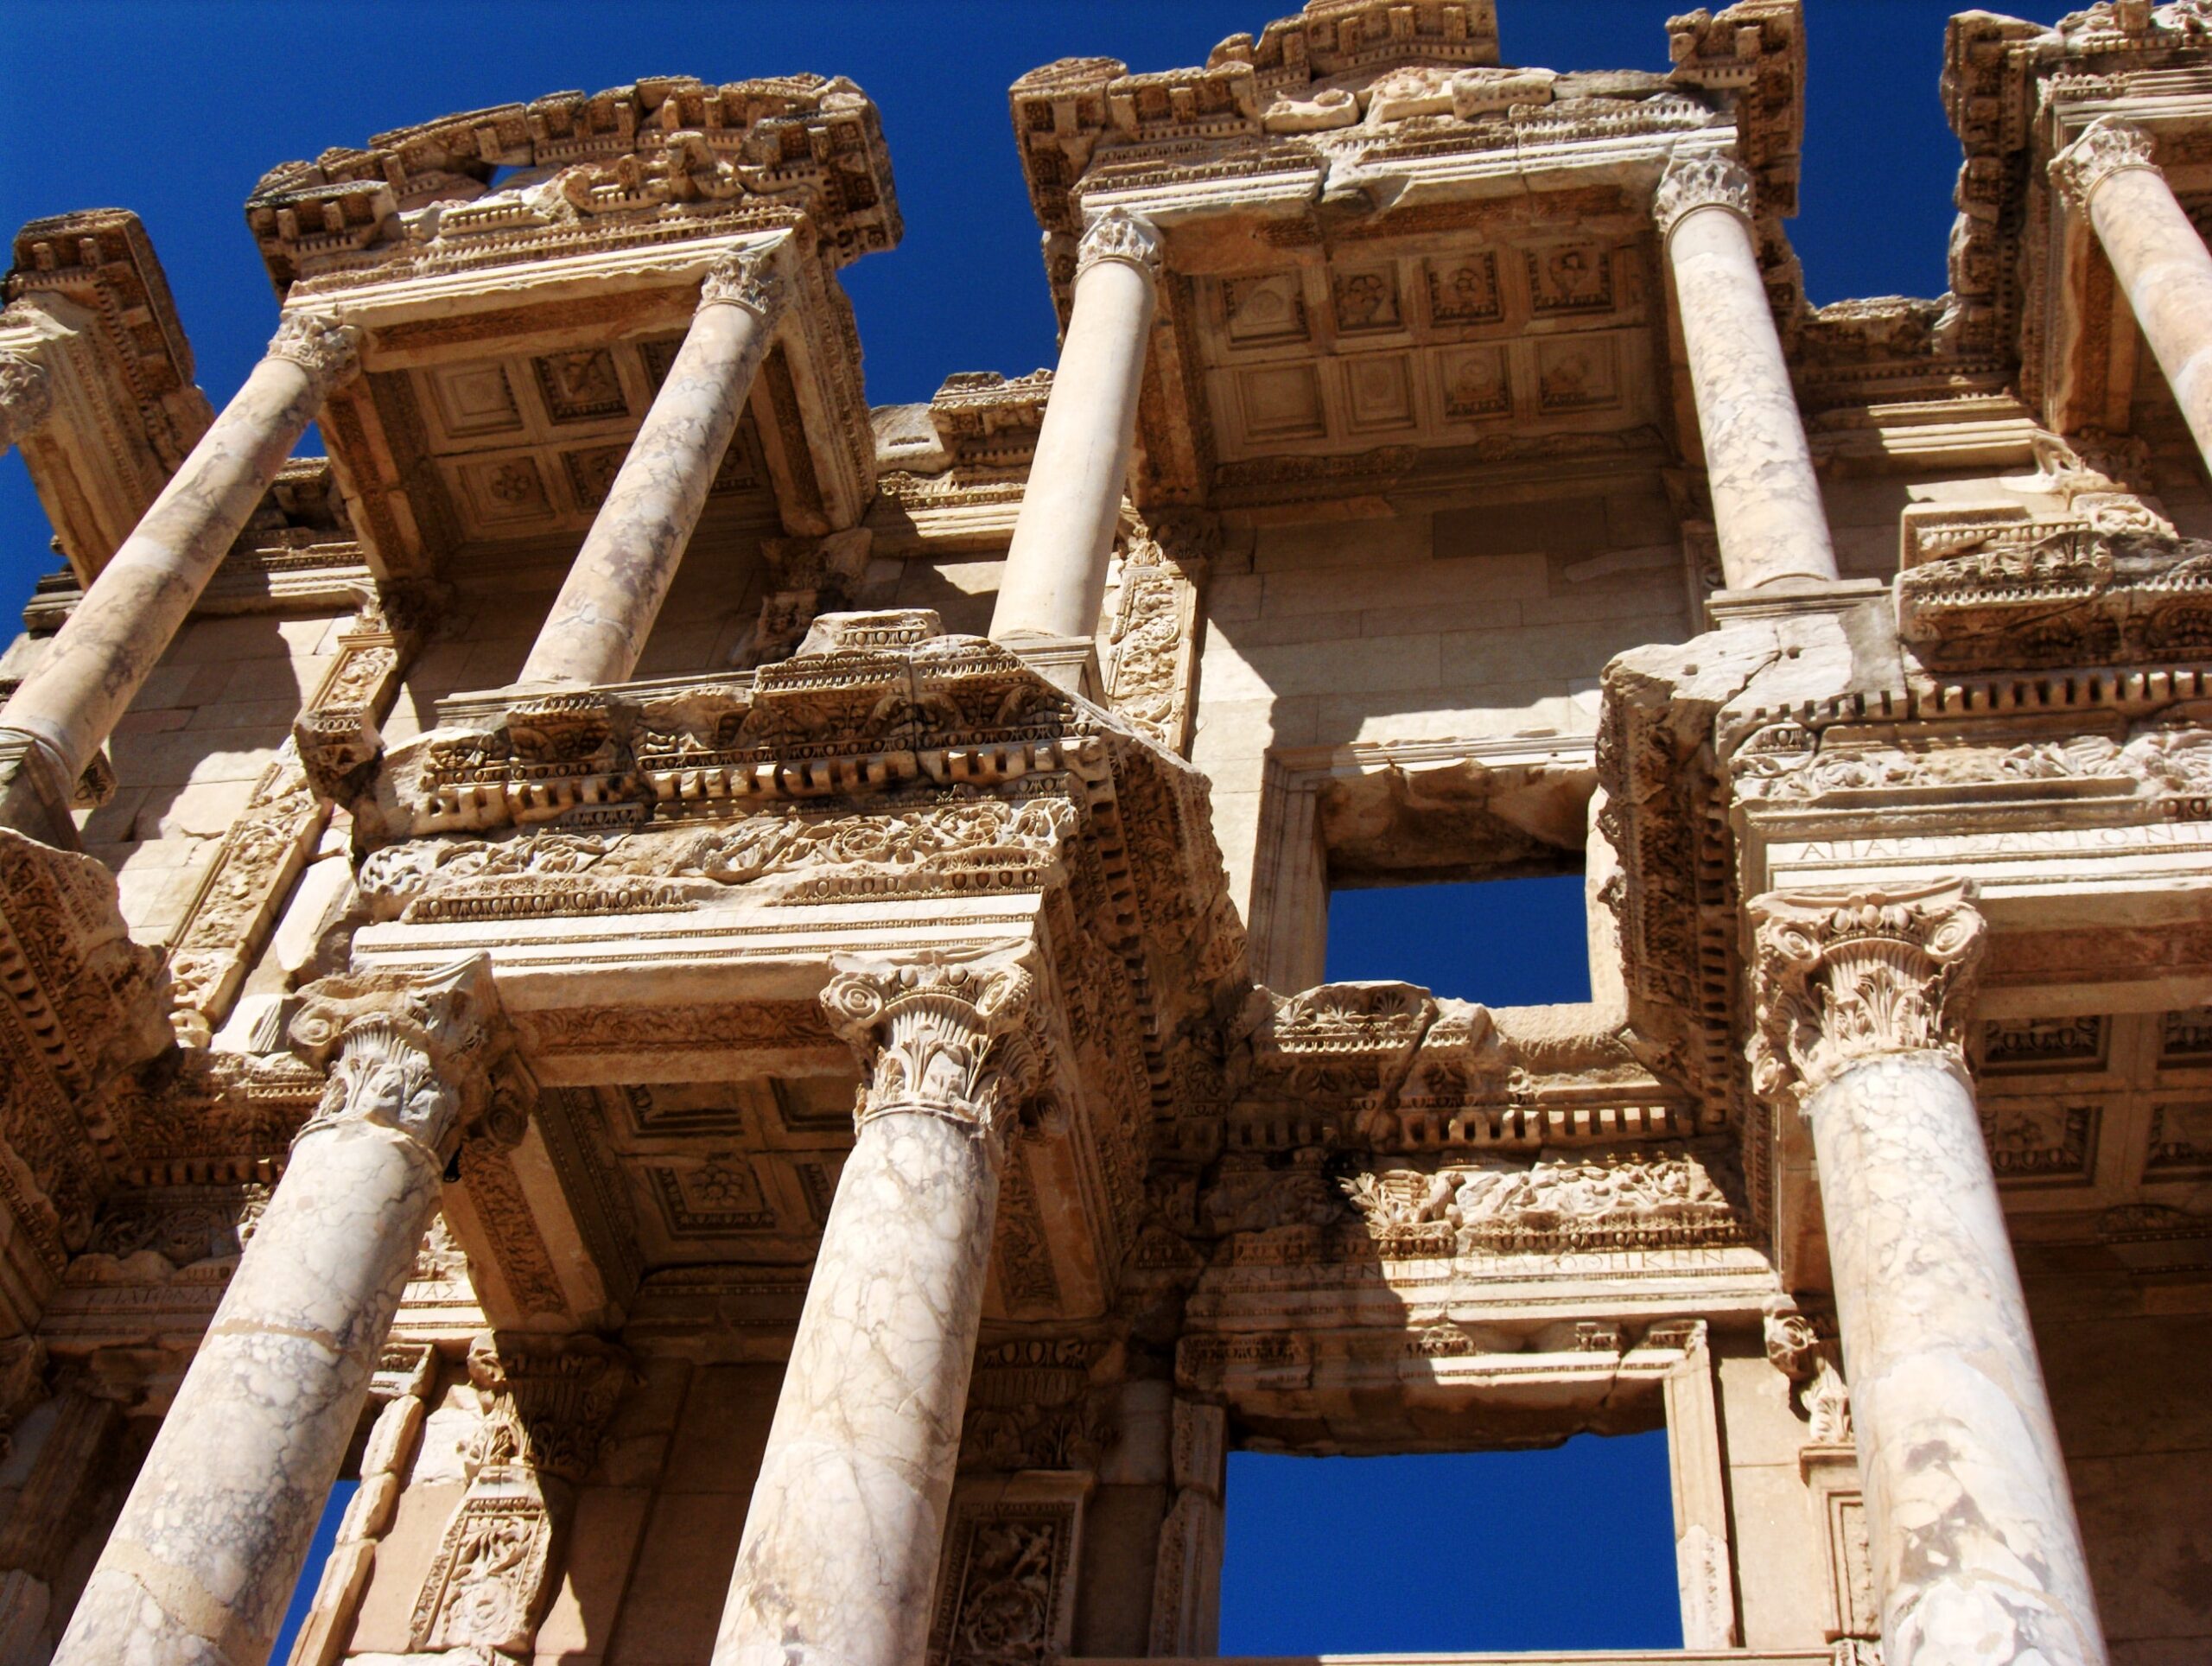 Photograph of the Library of Celsus at Ephesus, Turkey.